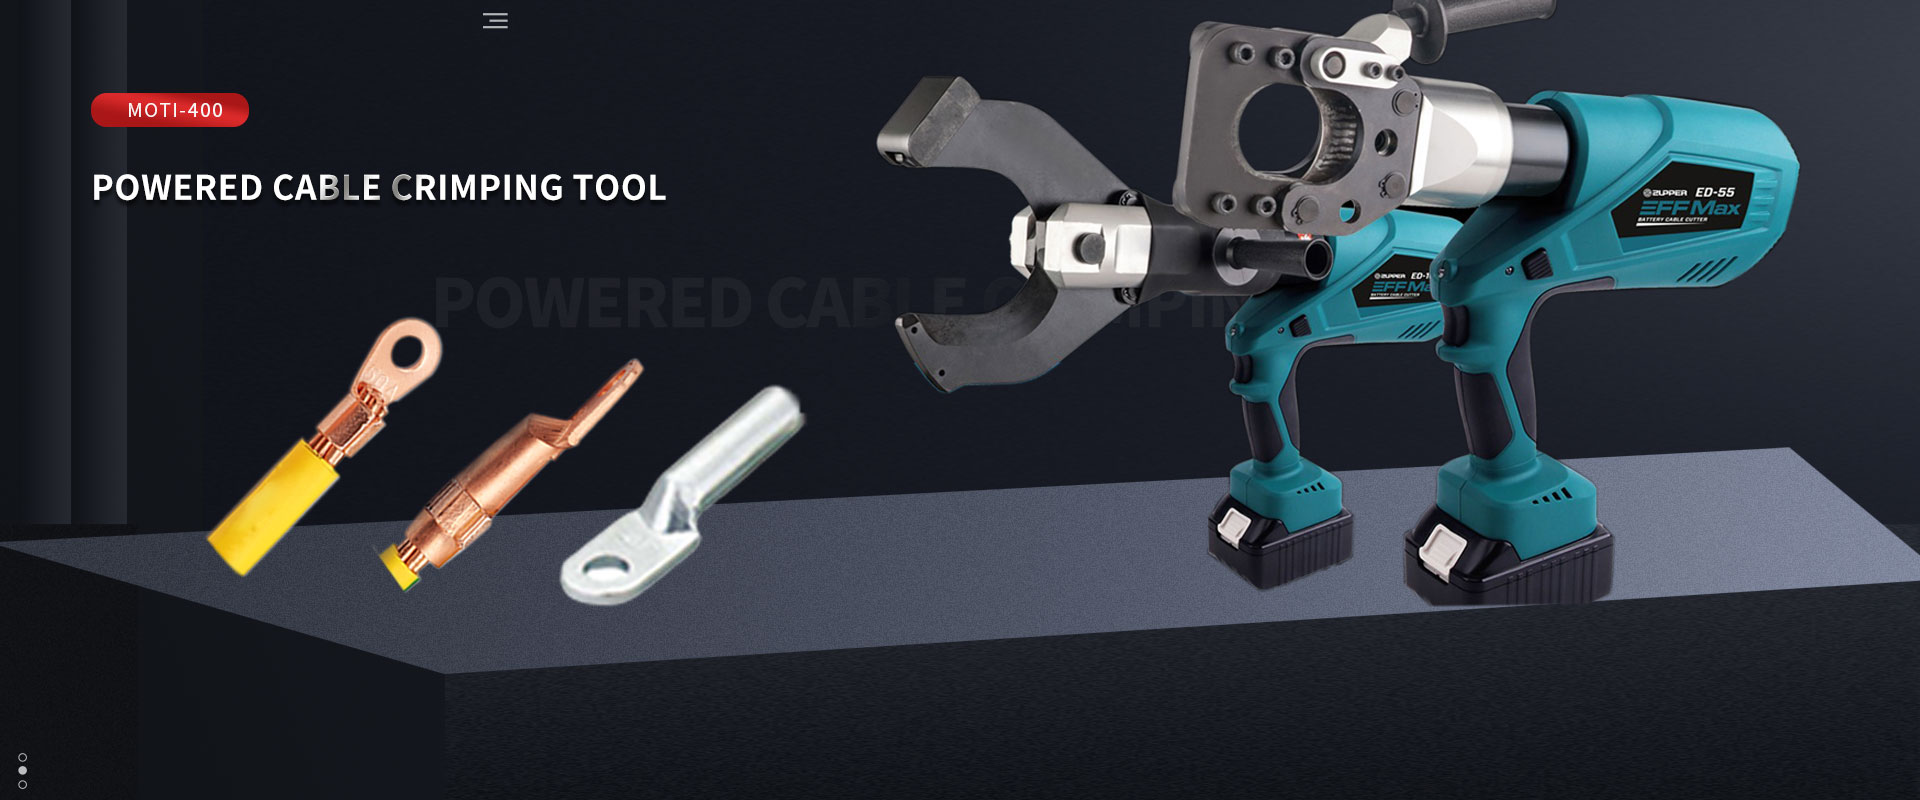 Powered cable crimping tool